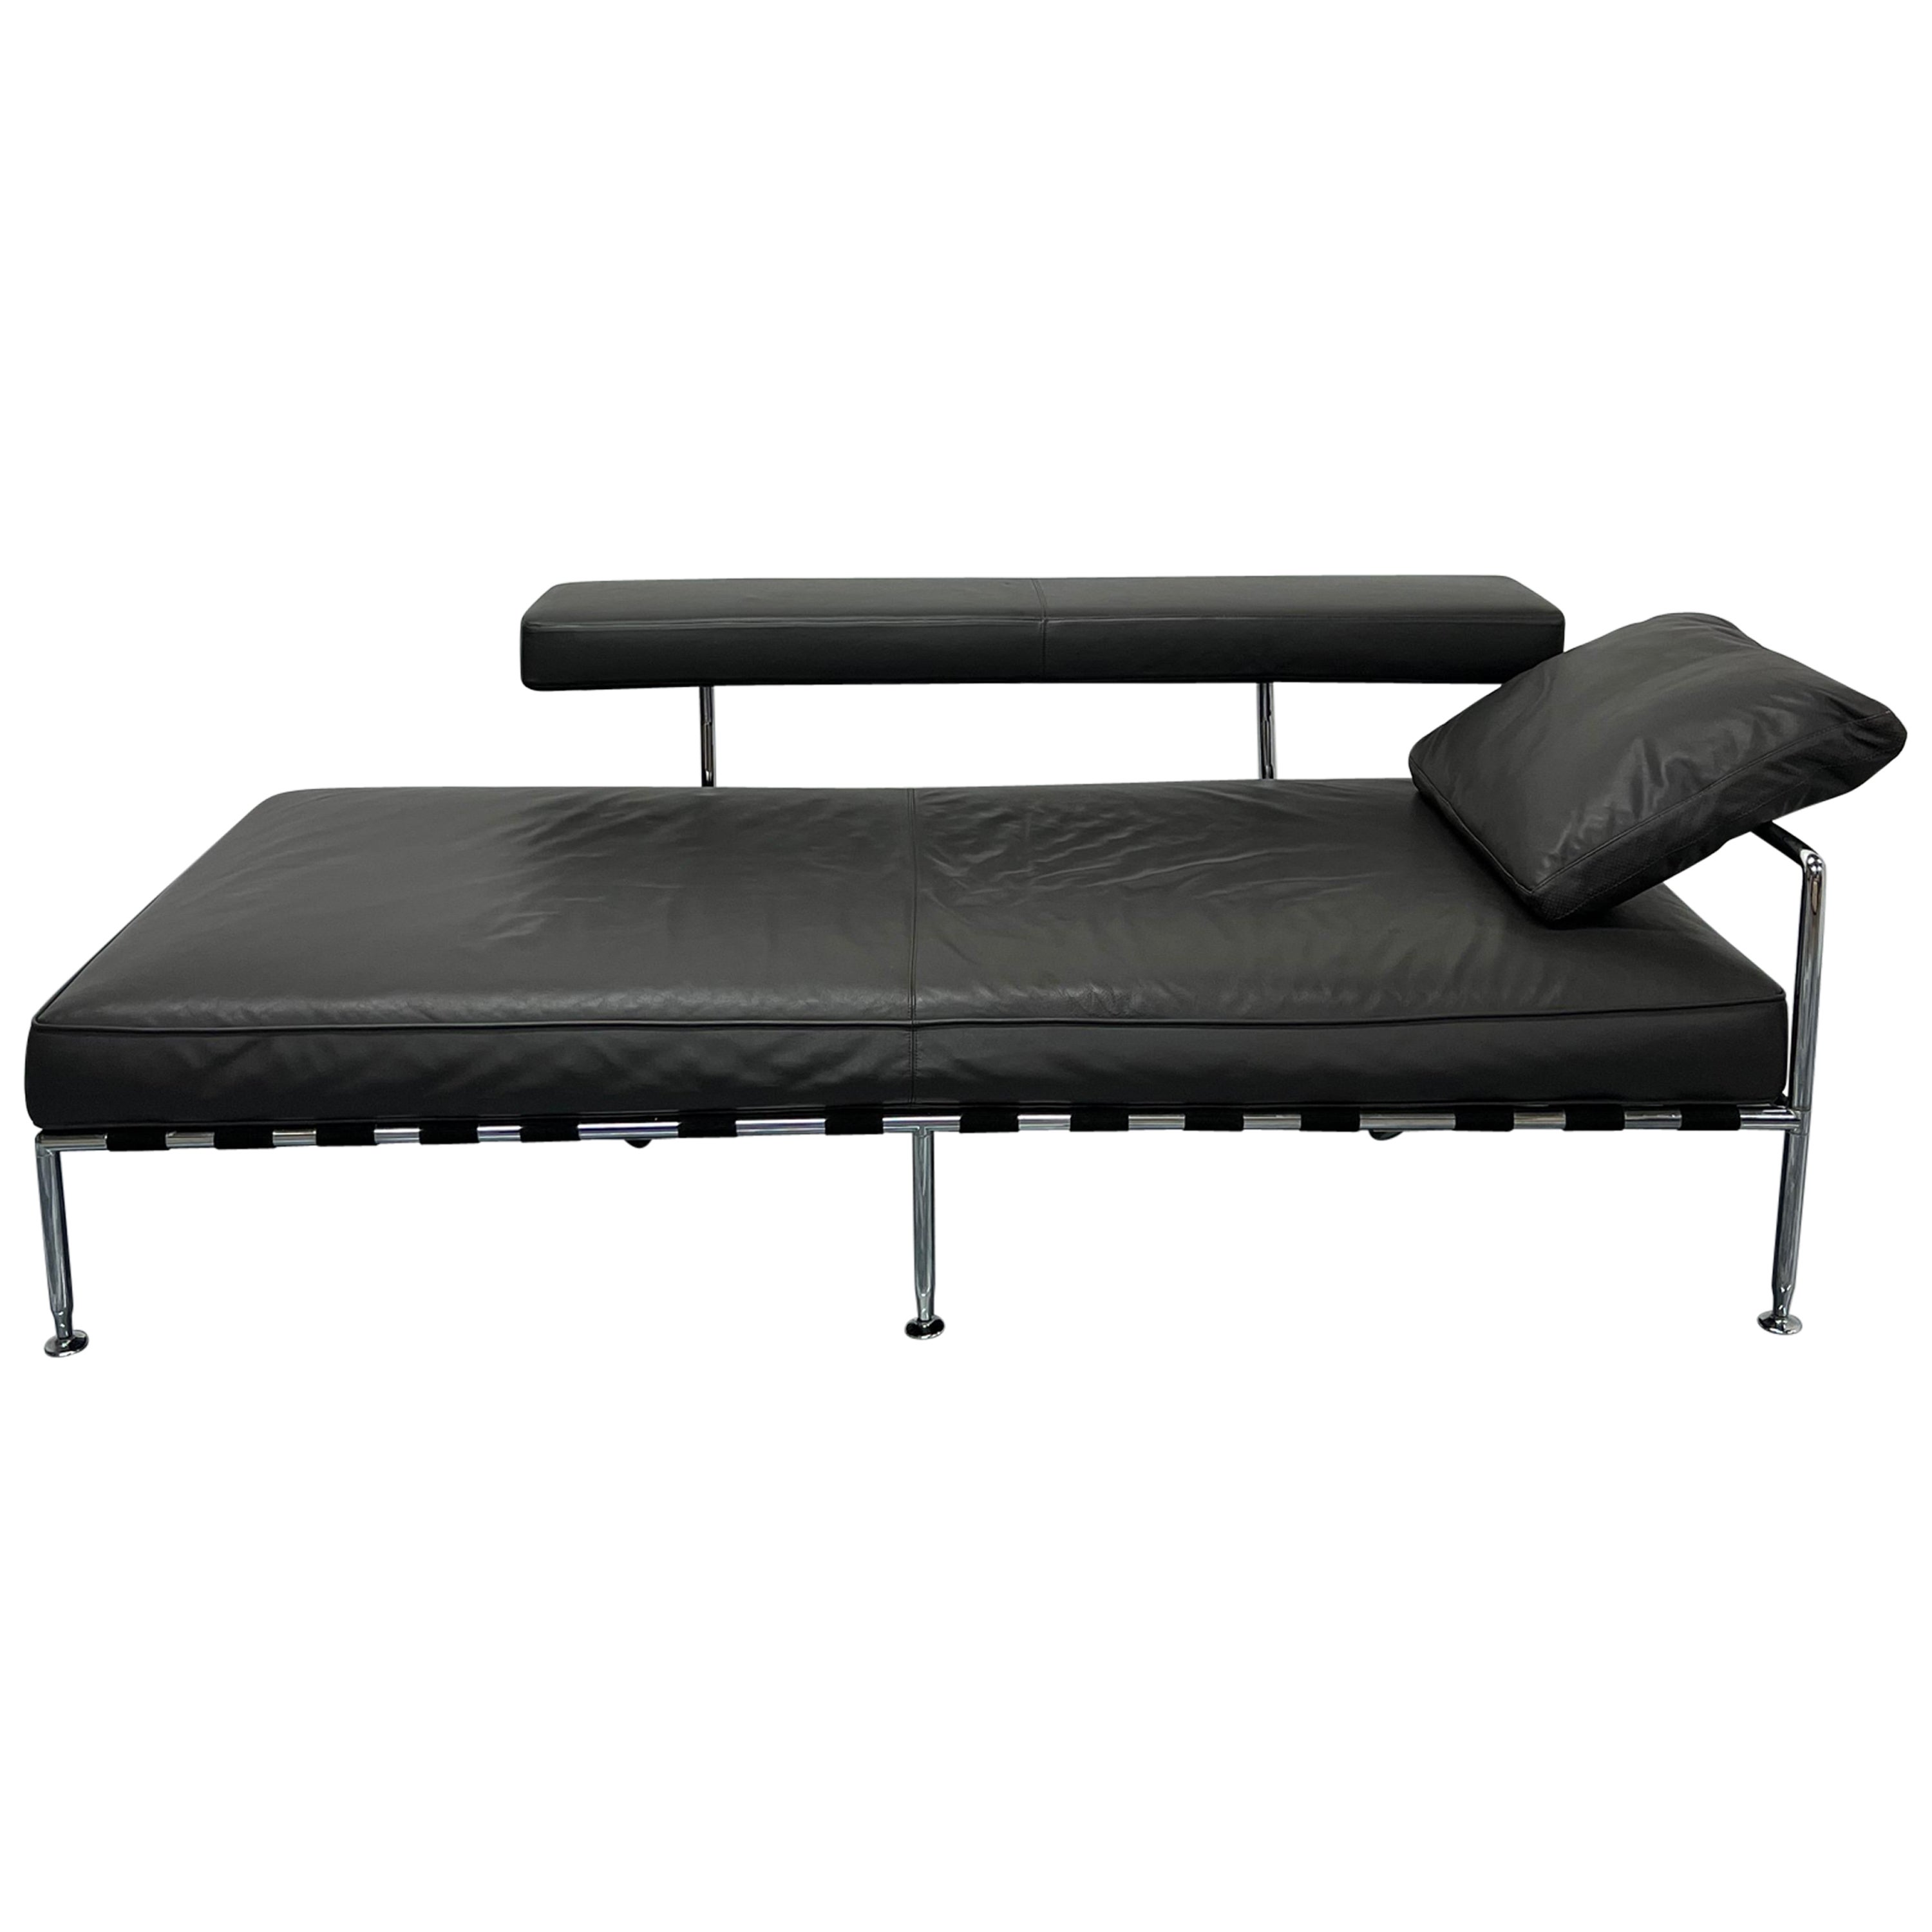 Antonio Citterio "Free Time" Leather and Tubular Chrome Daybed for B&b Italia